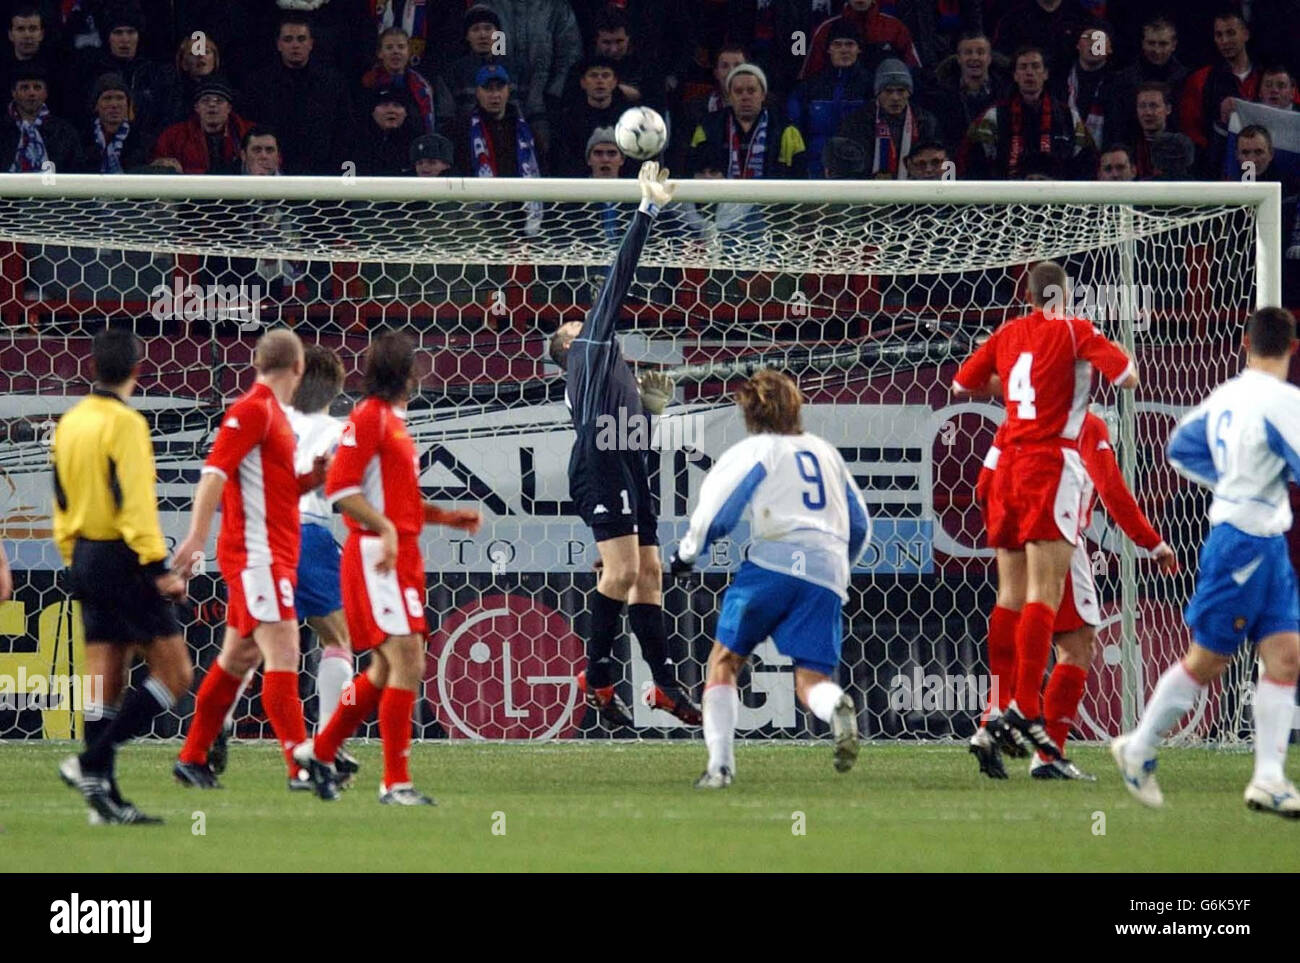 Wales' goalkeeper Paul Jones makes a save against Russia during the Euro 2004 play-off match at the Lokomotiv Stadium , Moscow, Stock Photo